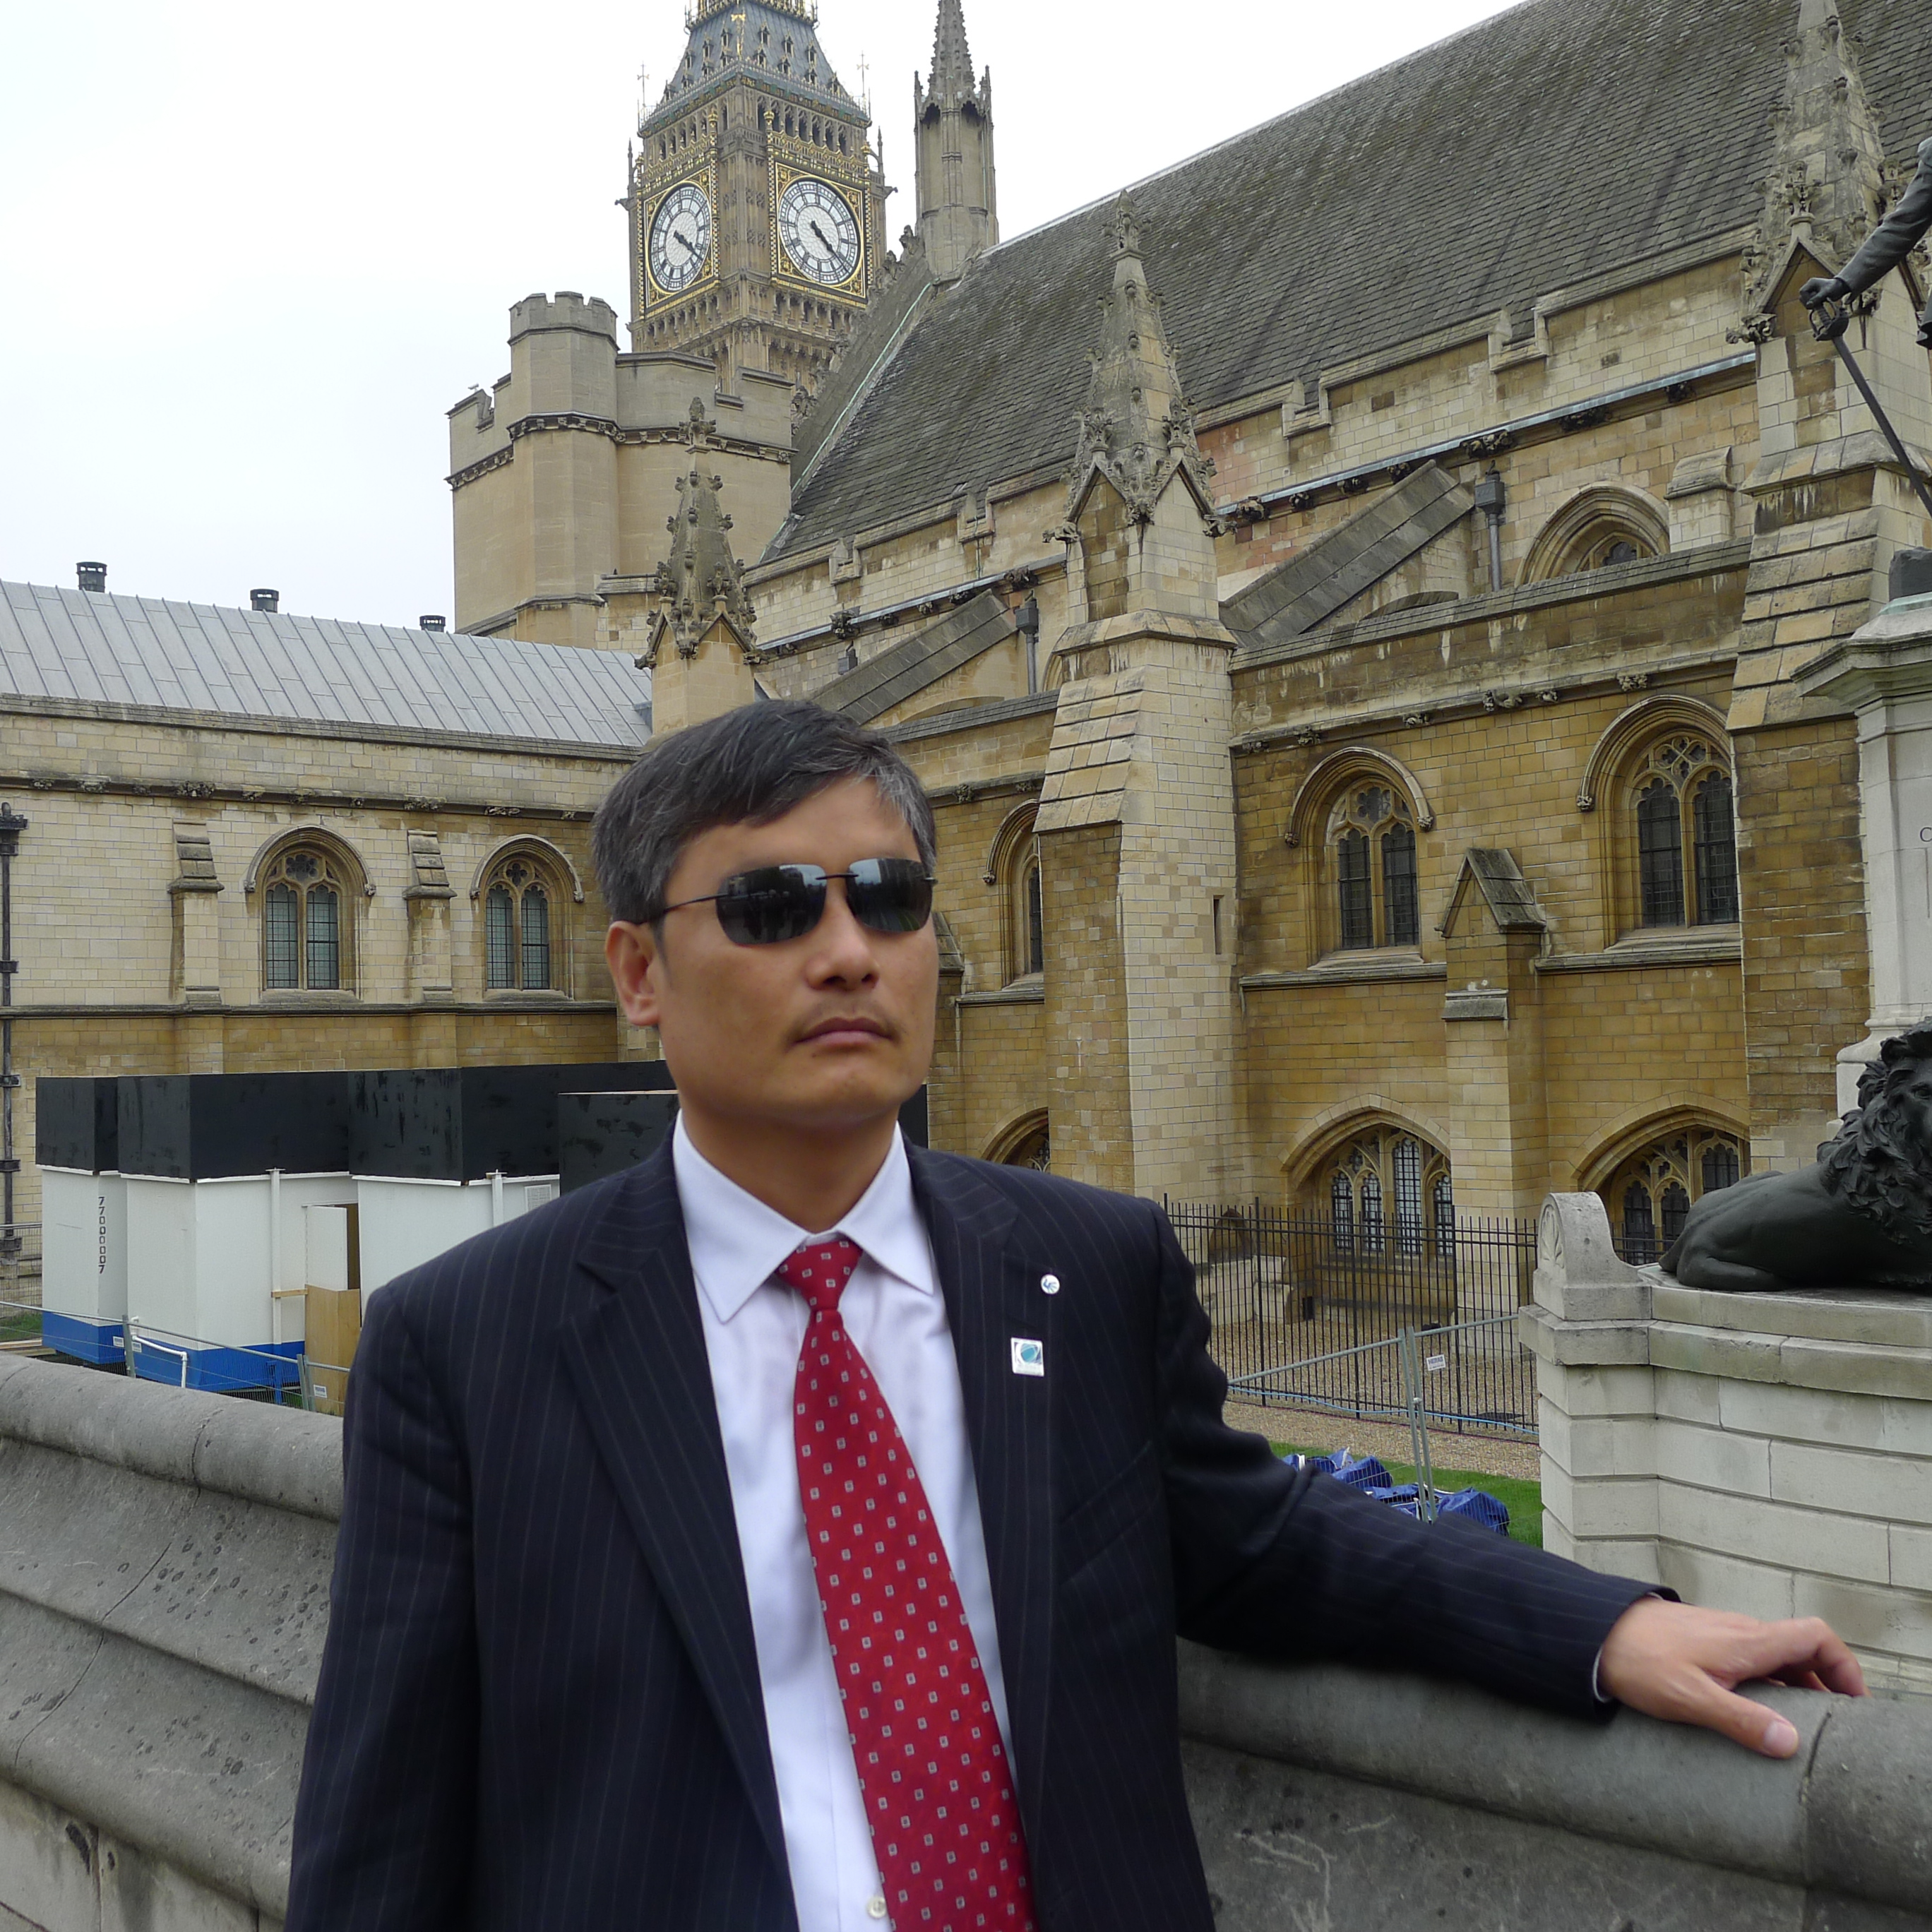 Chen Guangcheng arrives at Westminster: "It has taken a blind man to see what the world has refused to see."